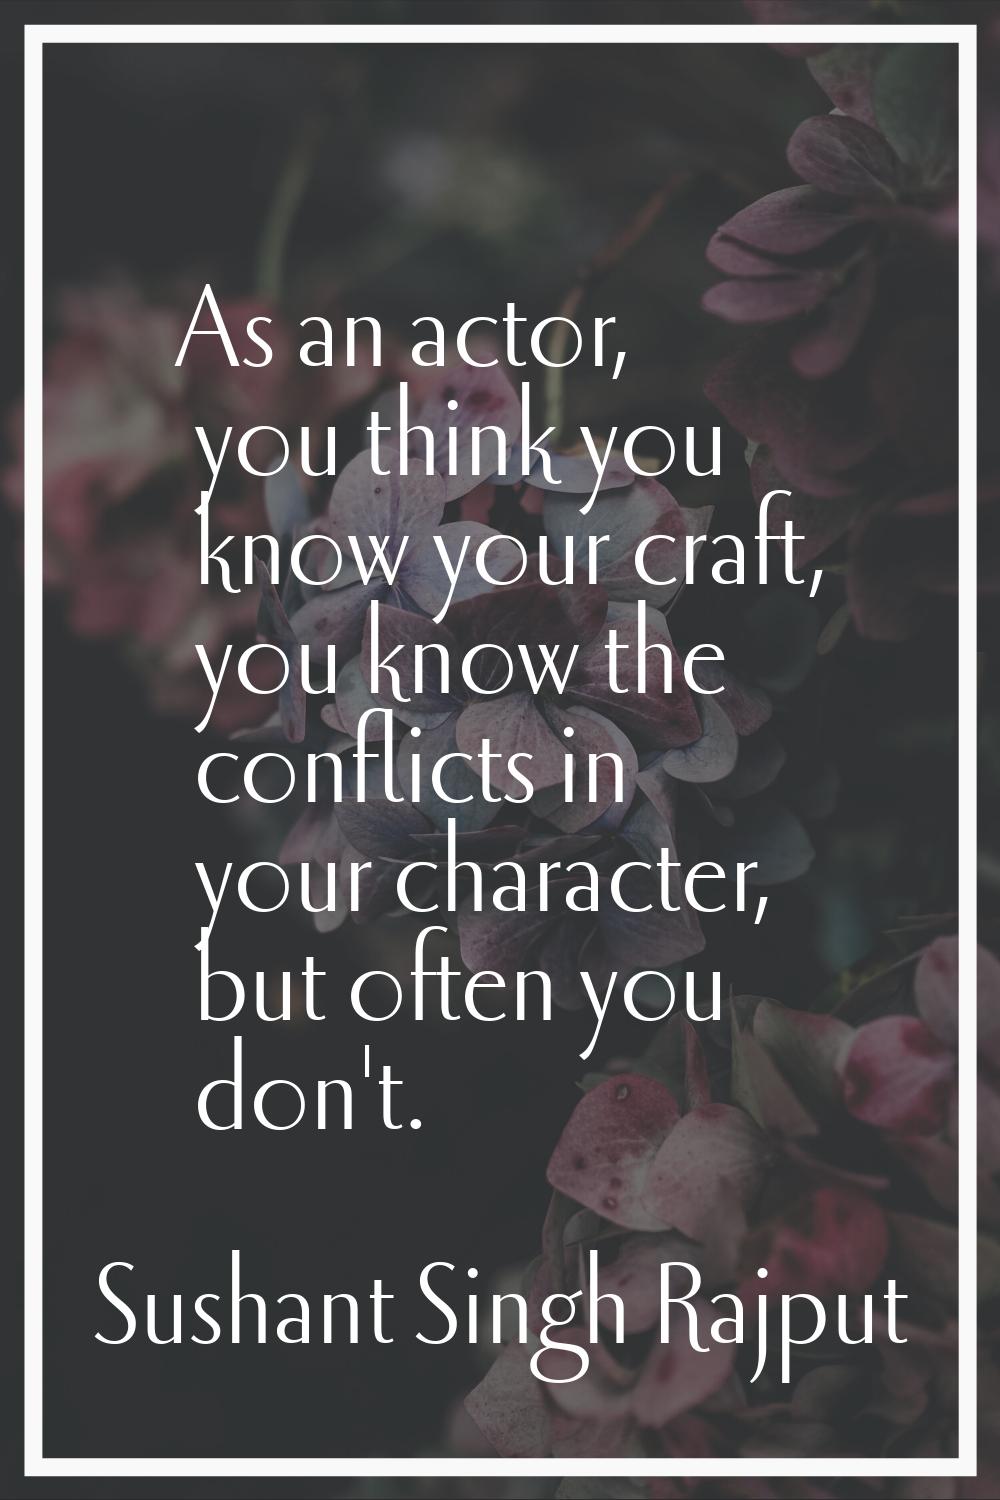 As an actor, you think you know your craft, you know the conflicts in your character, but often you